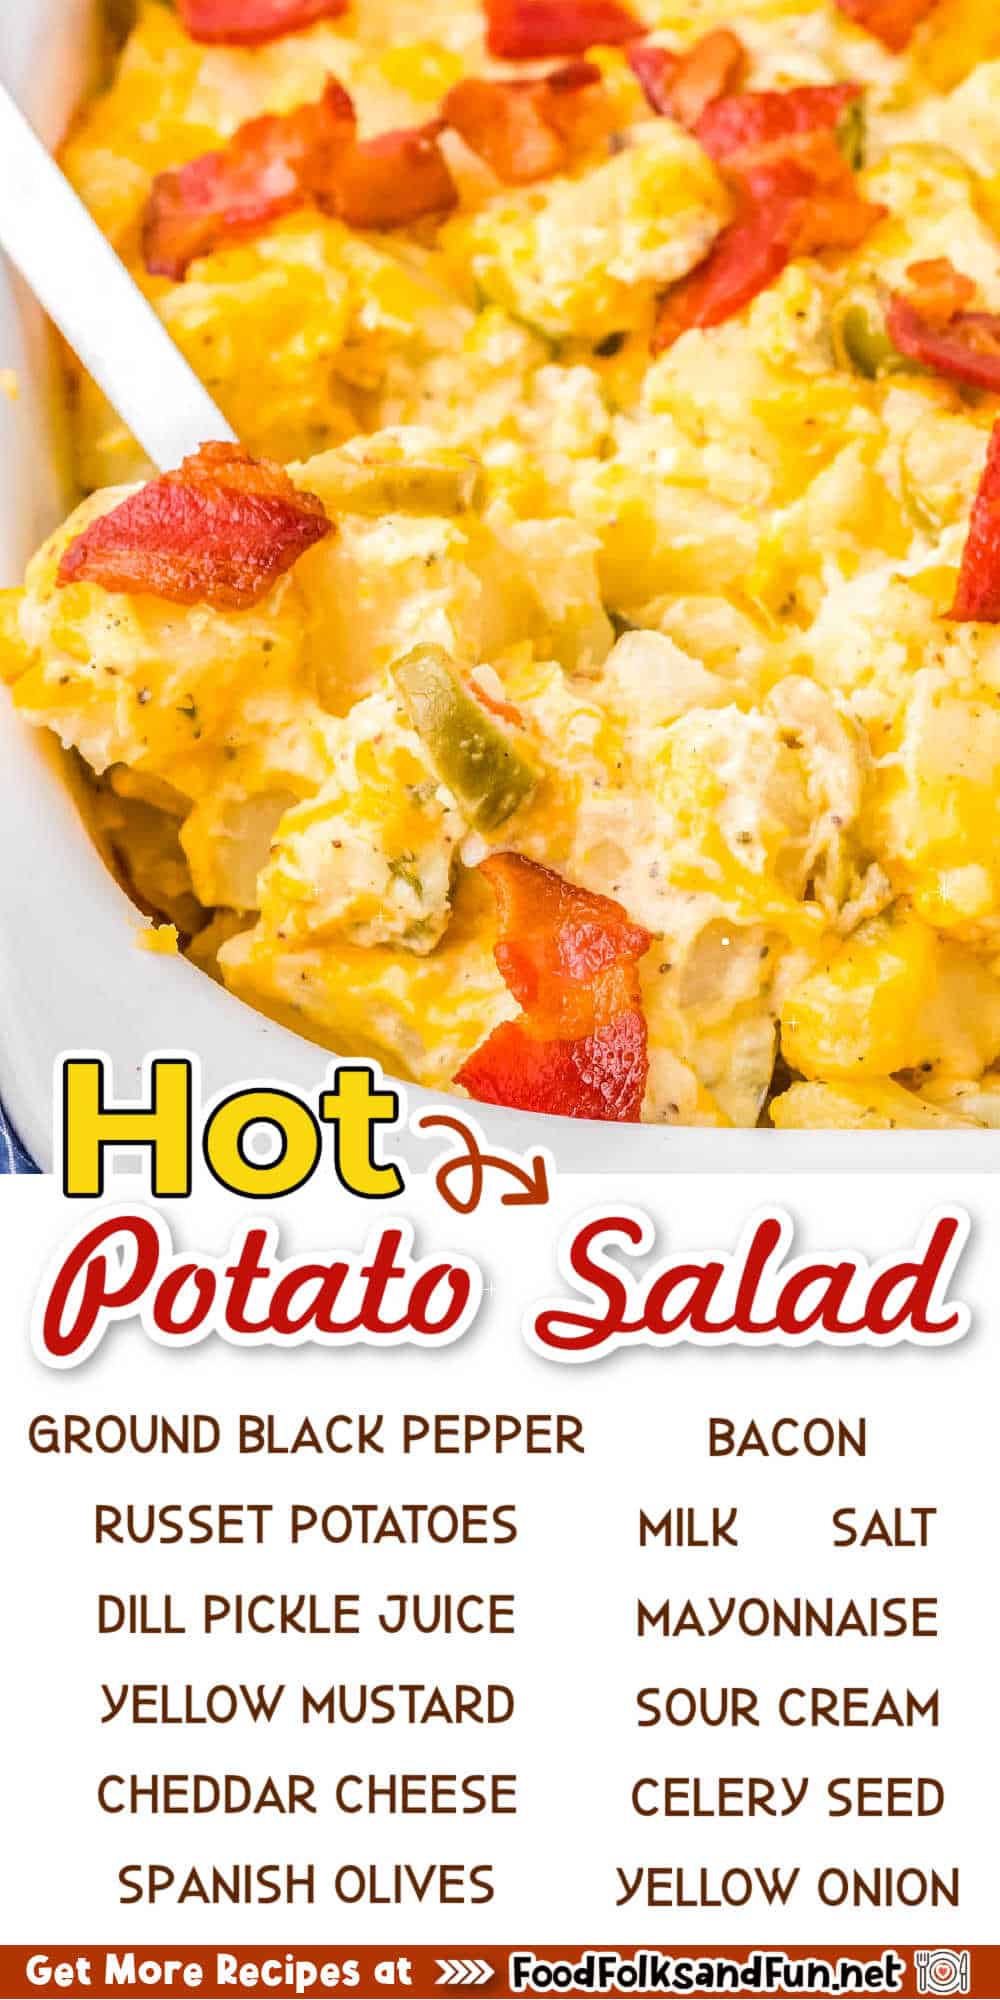 This Baked Potato Salad is your favorite potato salad recipe turned into a warm and cheesy casserole. It's comfort food at its finest!  via @foodfolksandfun